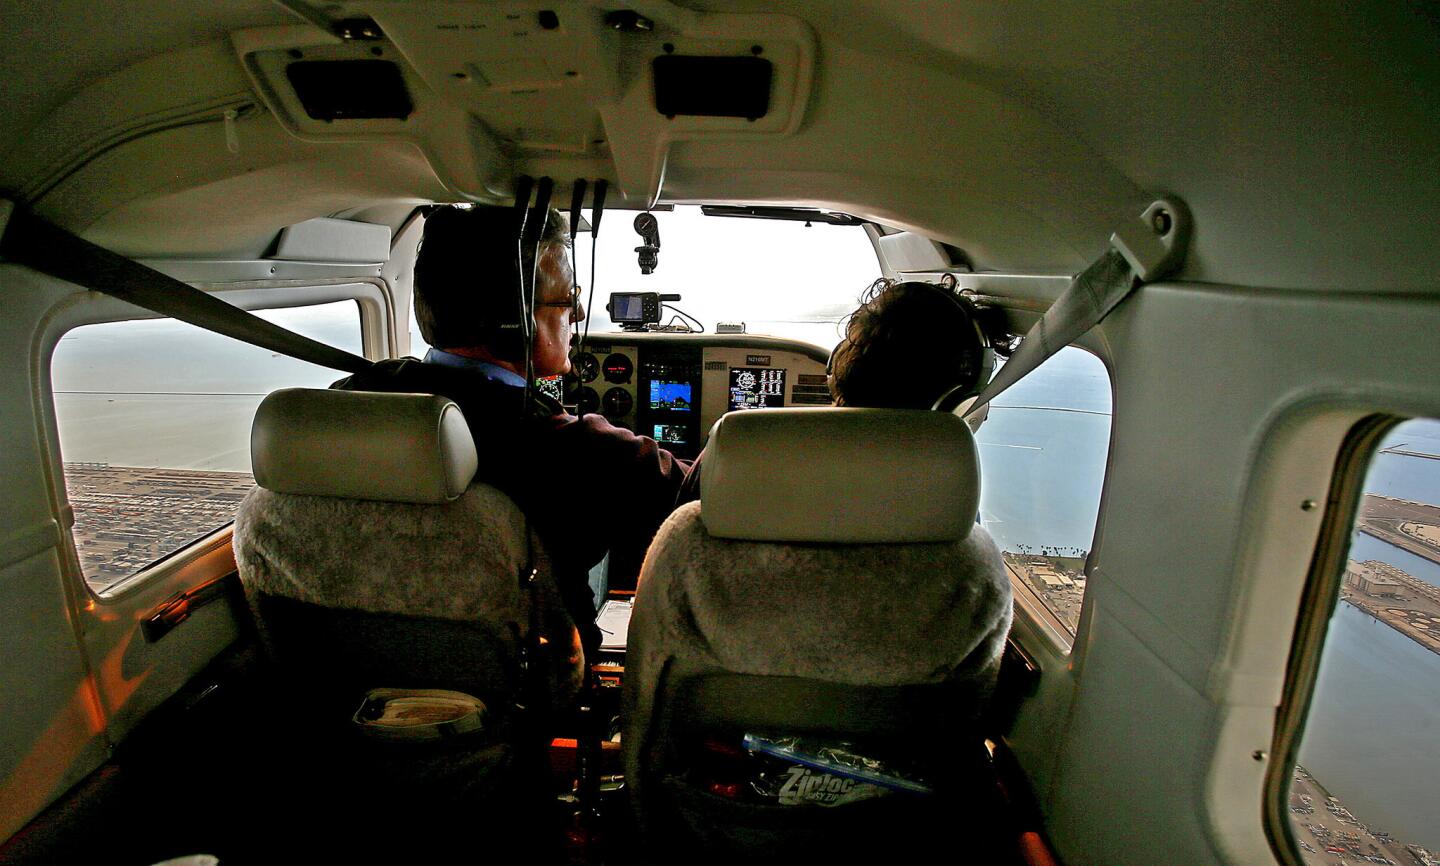 Mike Sutton, left, head of the California Fish and Game Commission, pilots a single engine aircraft over the Port of Los Angeles on his way to Southern California's Marine Protected Areas around the Palos Verdes Peninsula and Point Dume. Flying with him is Ana Luisa Ahern of environmental group Heal the Bay.